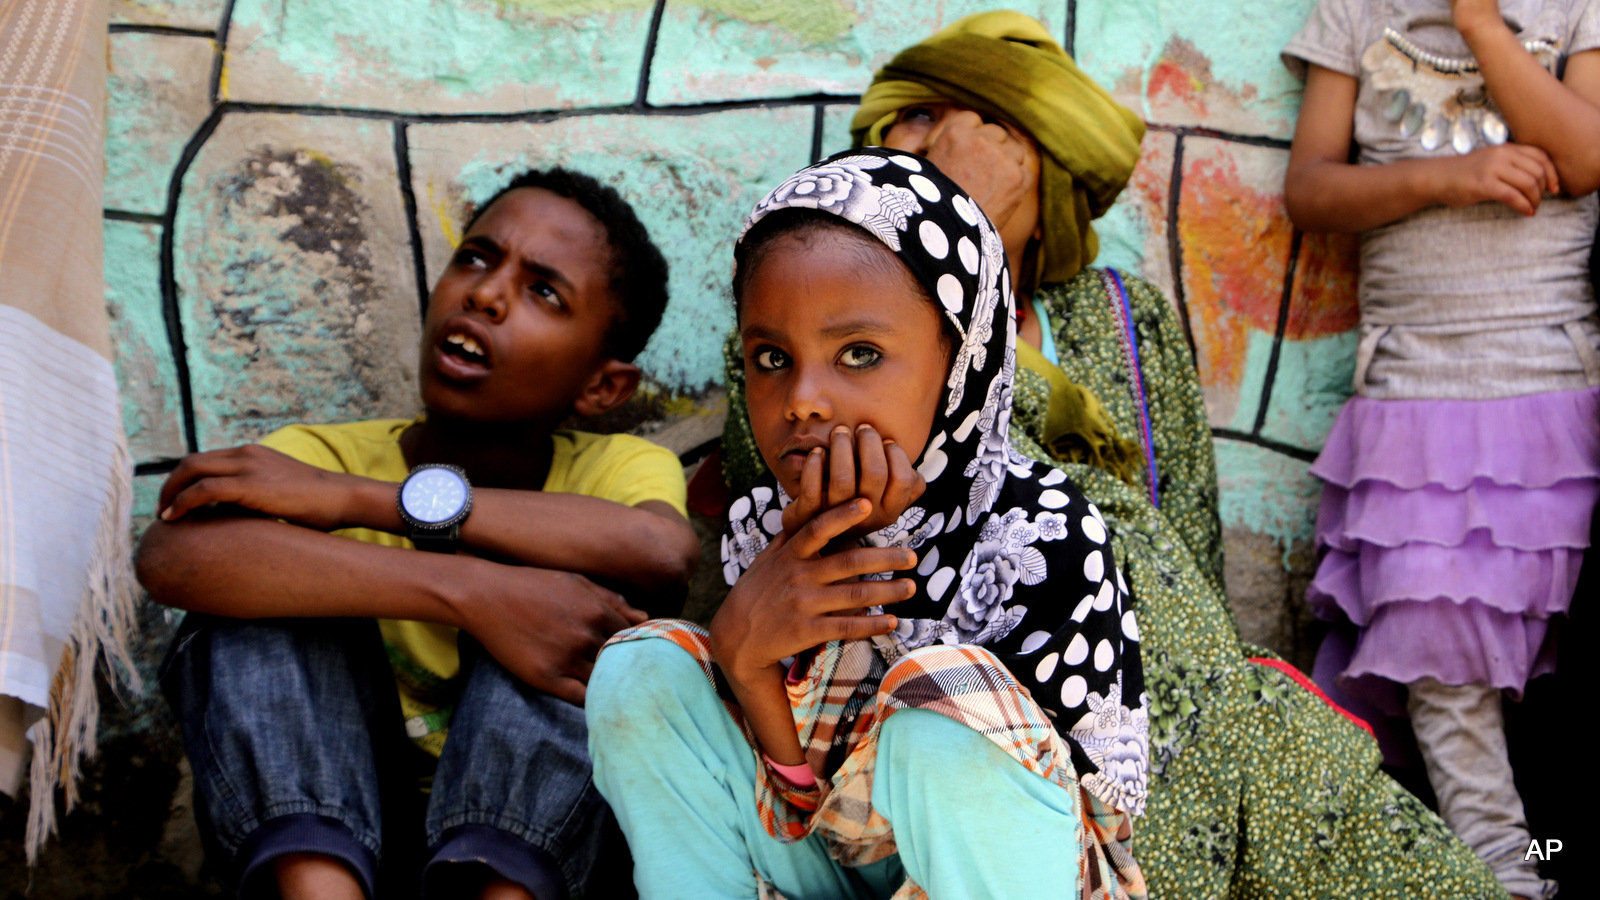 Saturday, May 9, 2015. Displaced families who fled fighting in the southern city of Aden wait for relief supplies during a food distribution effort by Yemeni volunteers, in Taiz, Yemen. Humanitarian organizations say they face challenges delivering aid to citizens affected by the ongoing conflict, because of a Saudi blockade on Yemen, which receives 90% of it's food from overseas.